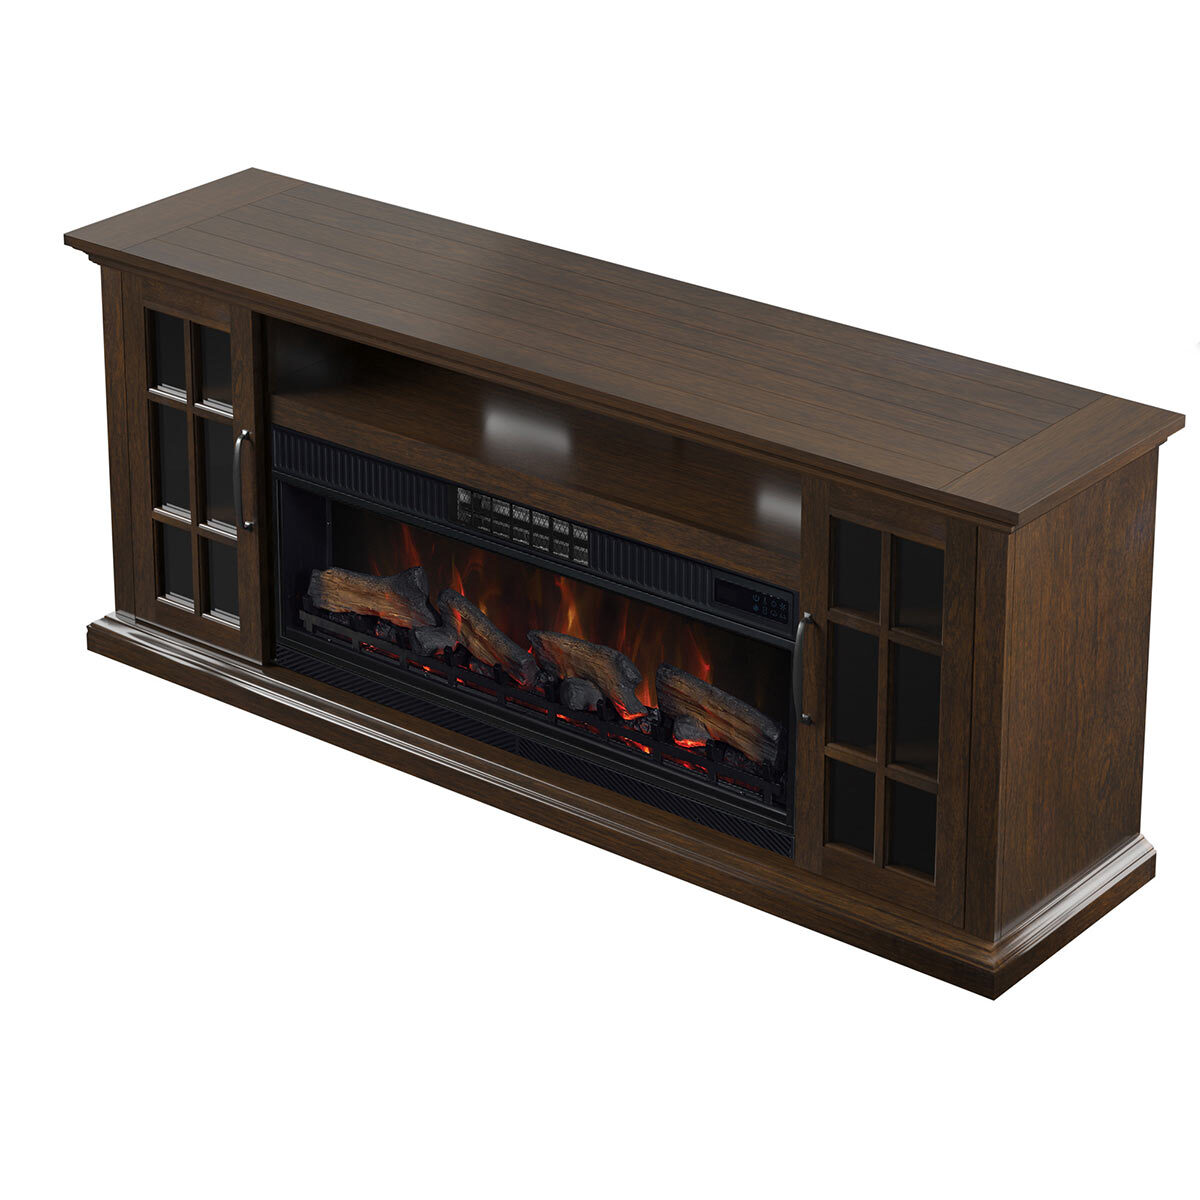 Image of Tresanti Mayson TV Console with Classic Flame